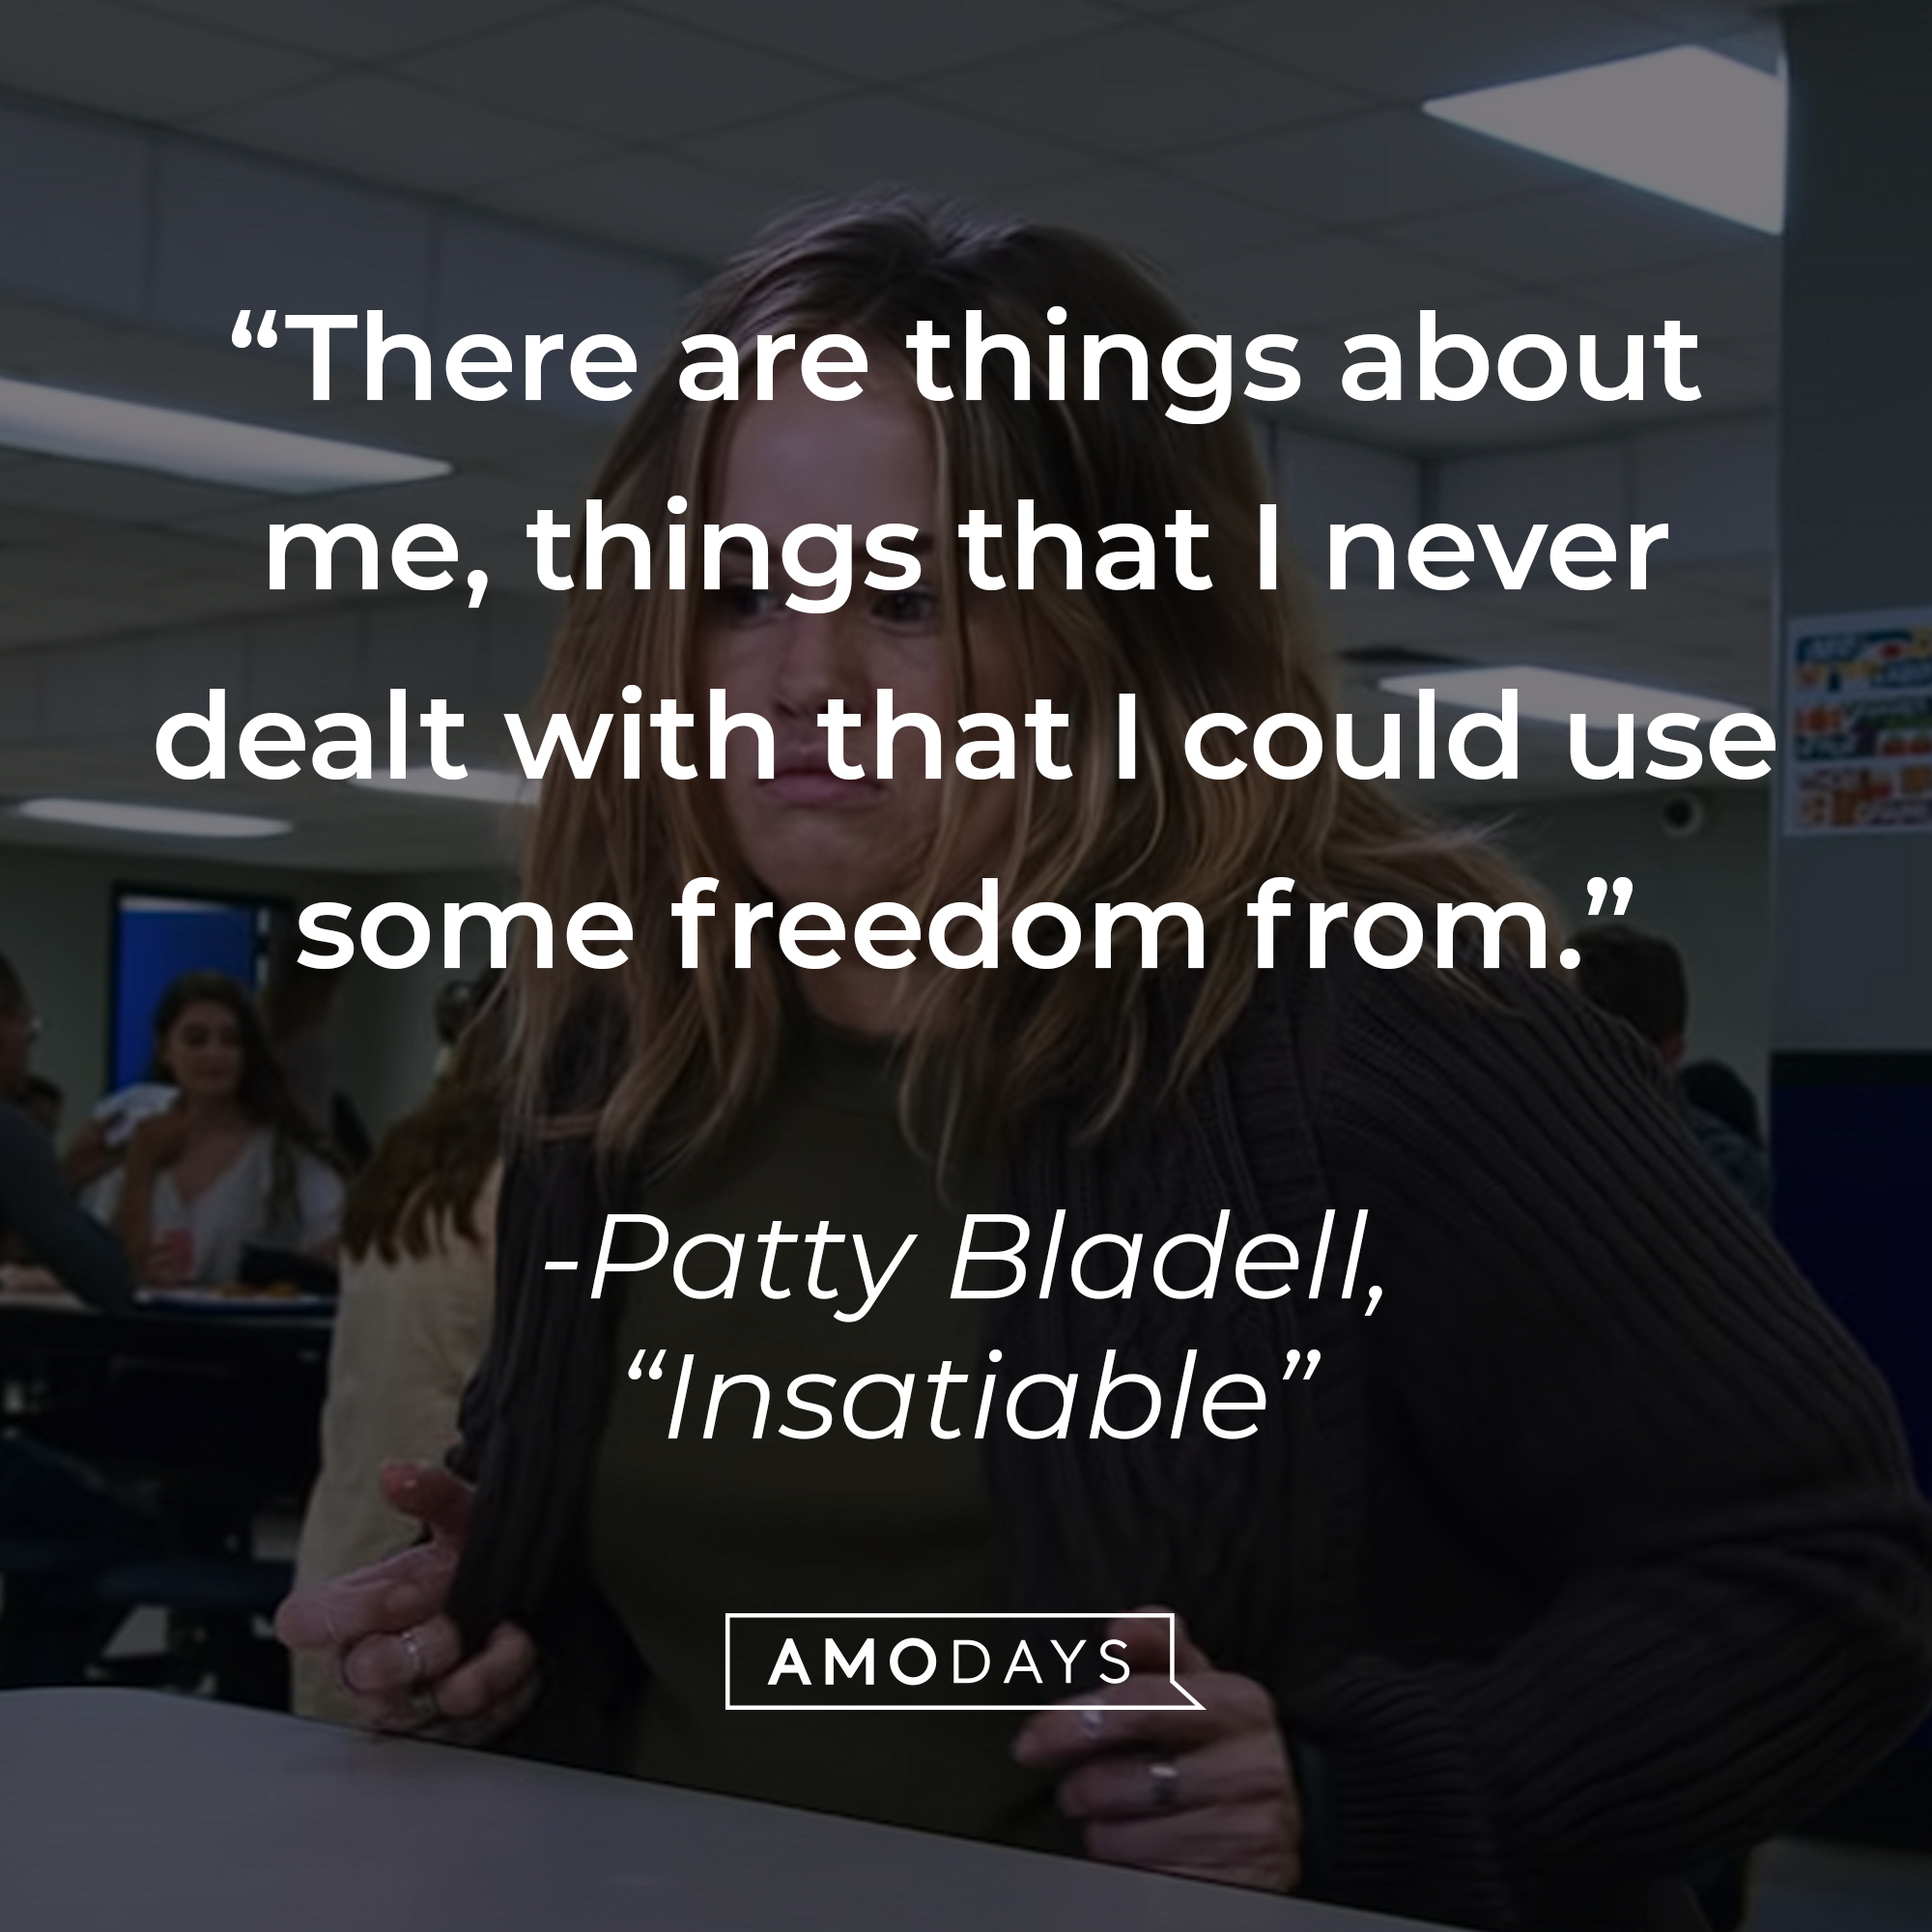 Patty Bladell with her quote on "Insatiable:" “There are things about me, things that I never dealt with that I could use some freedom from." | Source: Youtube.com/Netflix